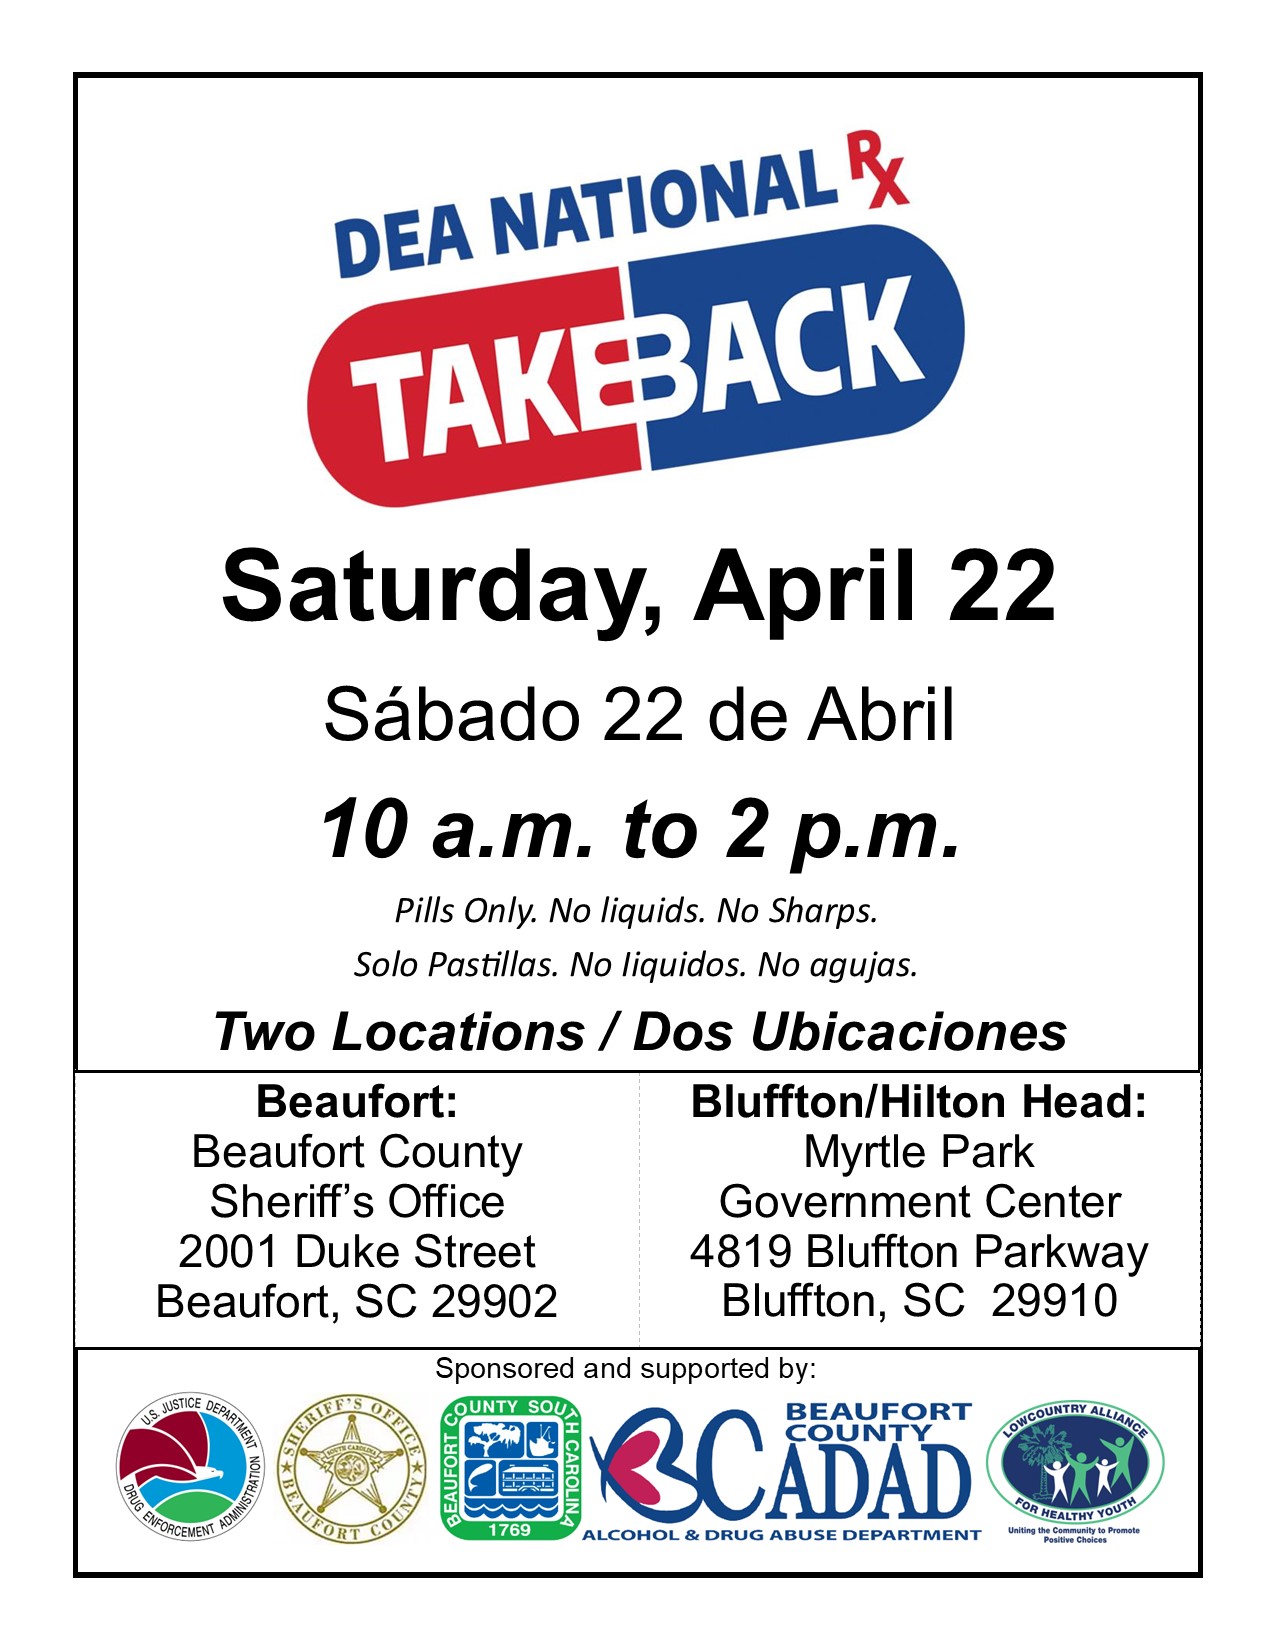 Beaufort County Offers Two Locations for Residents to Properly Dispose of Prescription Drugs Saturday, April 22